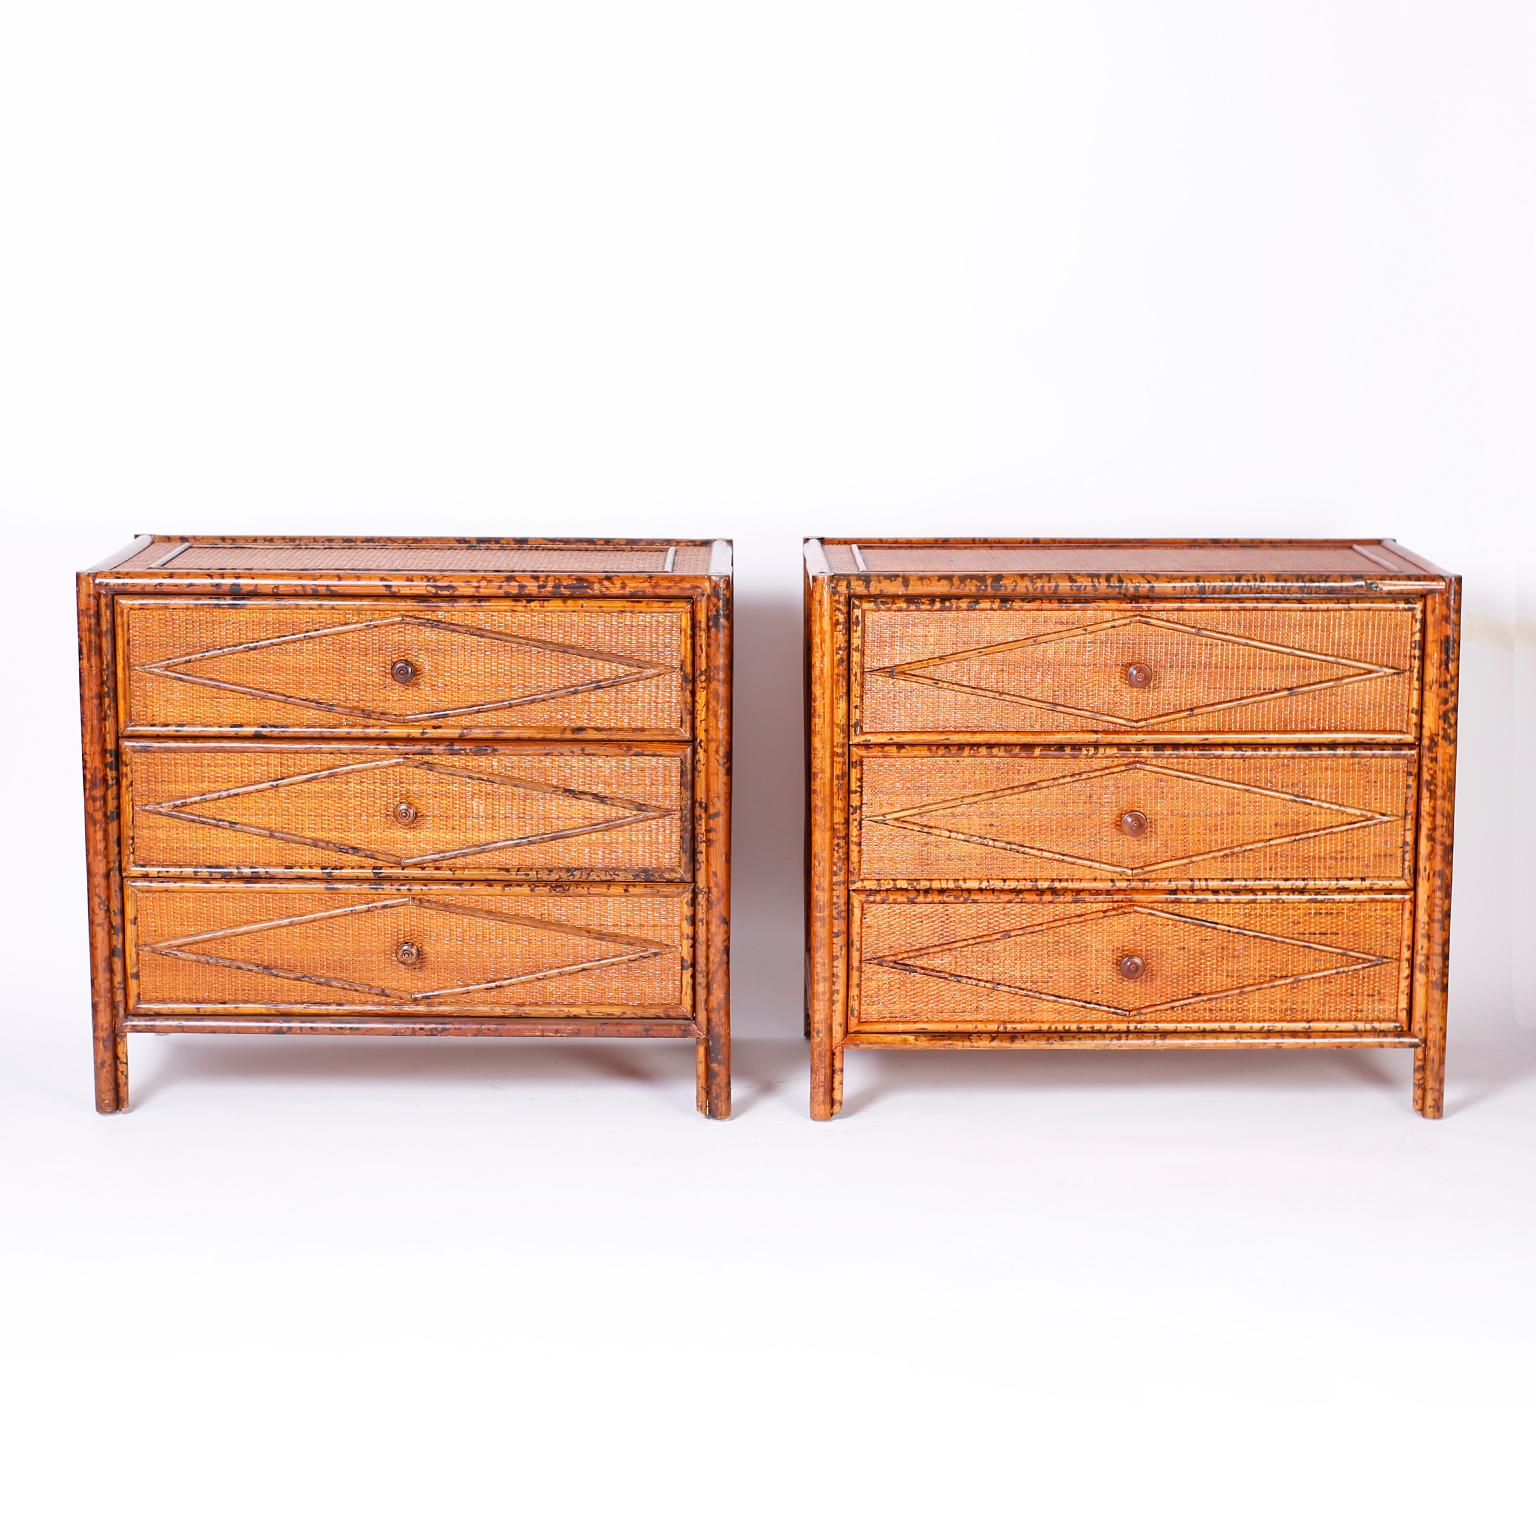 Pair of three drawer British Colonial style stands with faux burnt bamboo frames and grasscloth panels on the tops, sides, and drawer fronts under applied geometric designs.